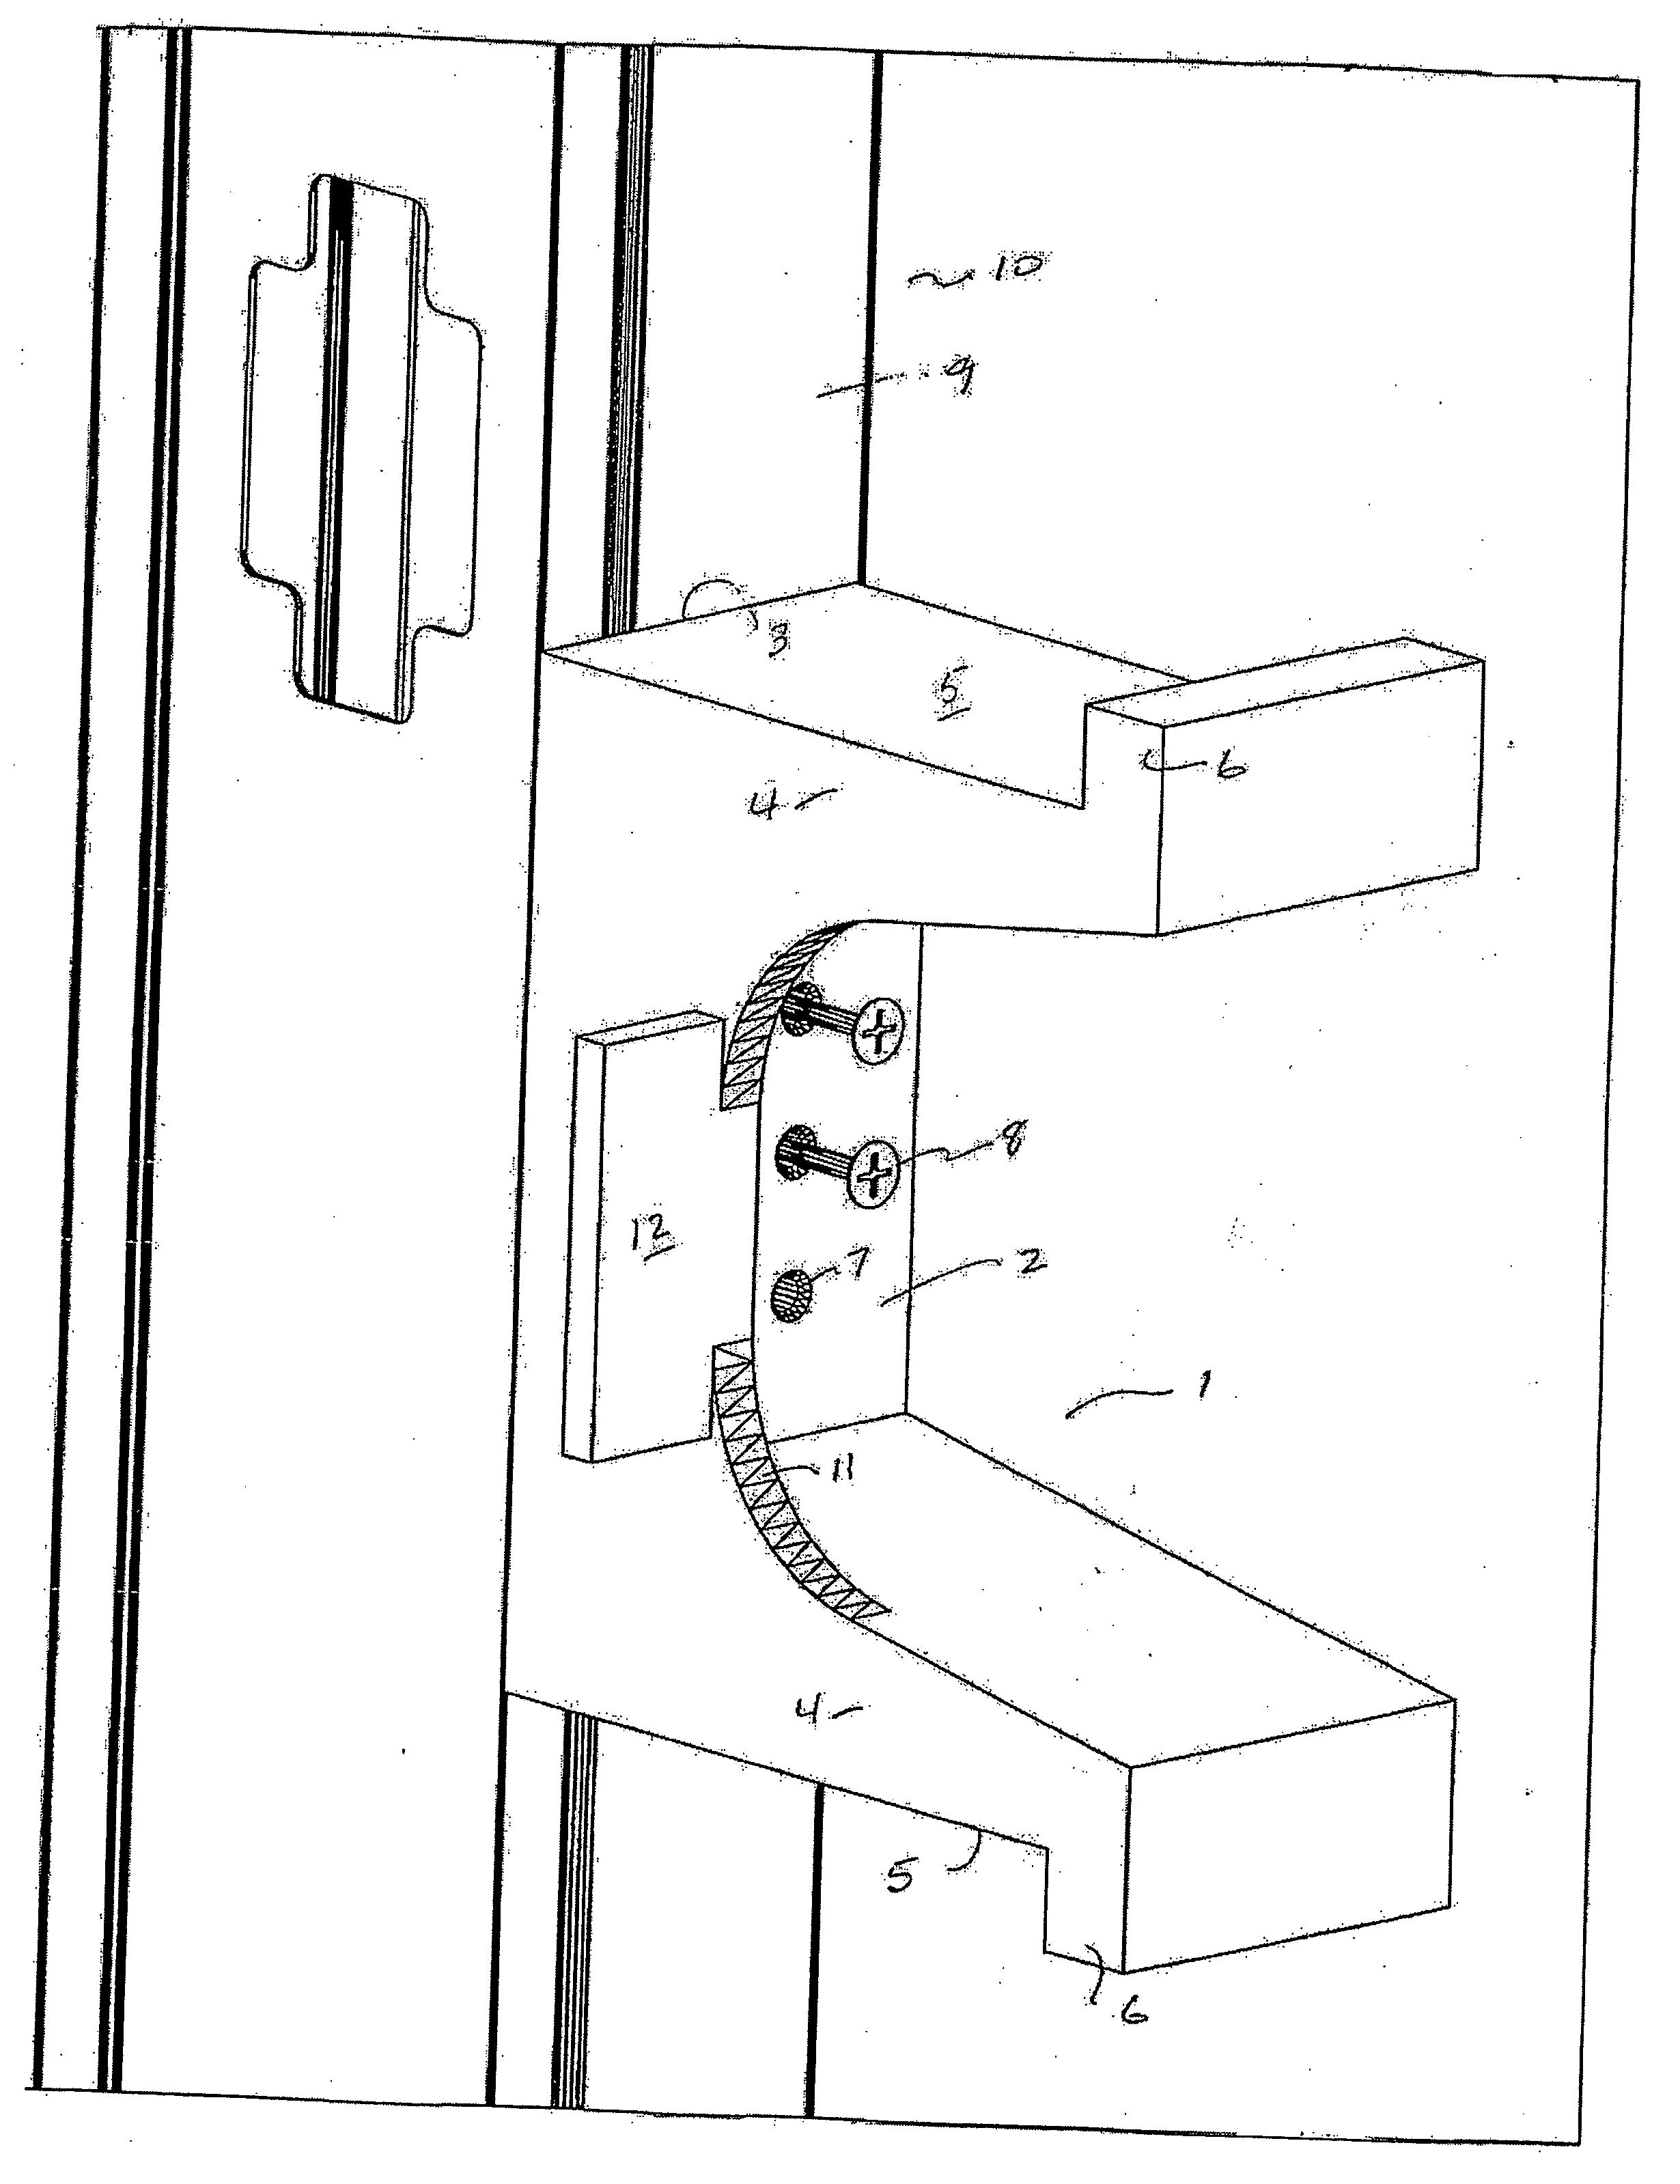 Support bracket to suspend sheet material for a wall